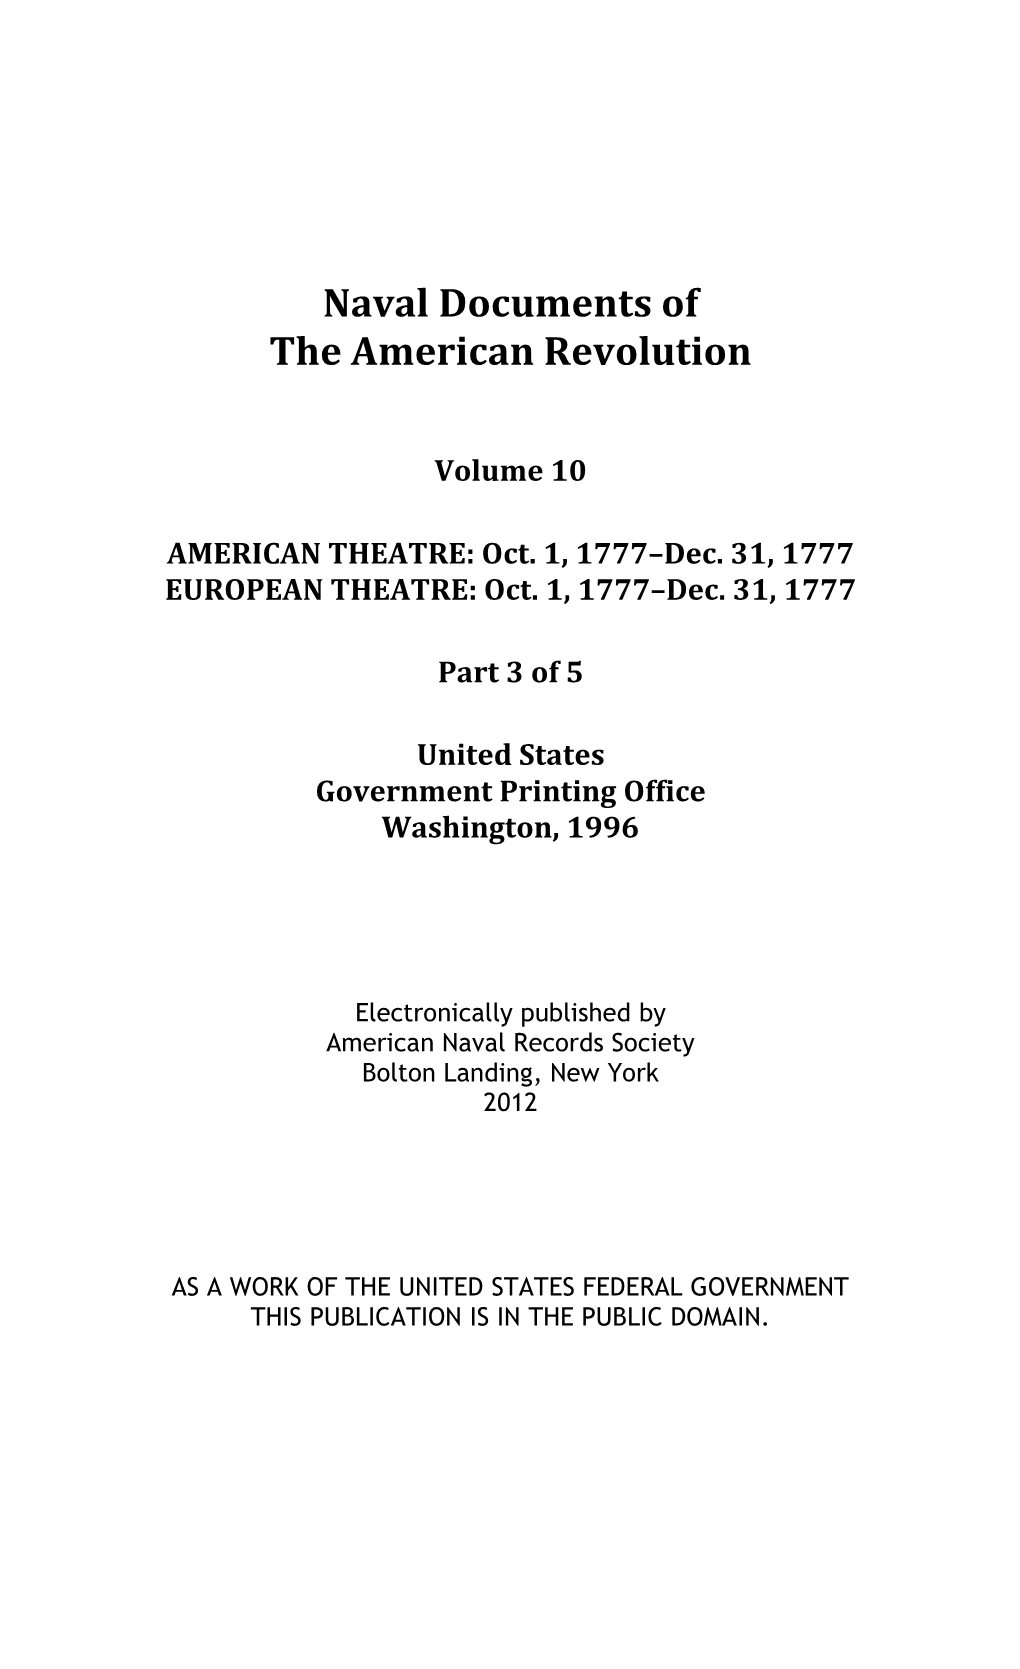 Naval Documents of the American Revolution, Volume 10, Part 3